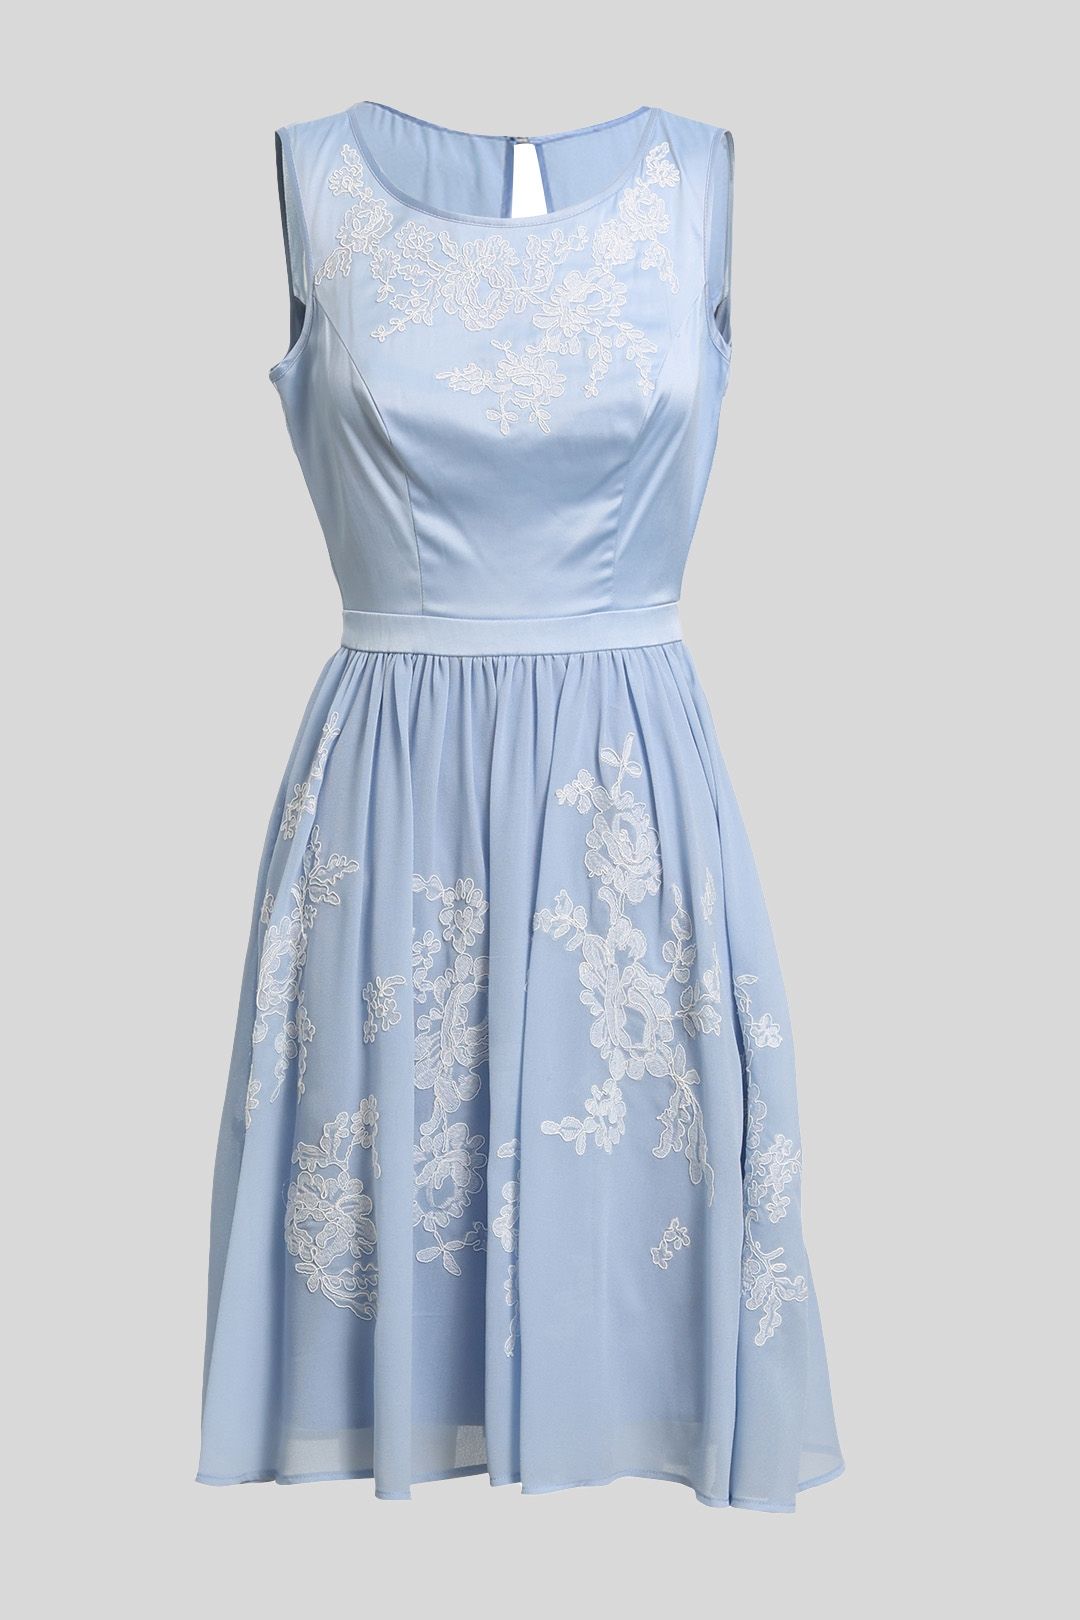 Review - Baby Blue Floral Krista Dress